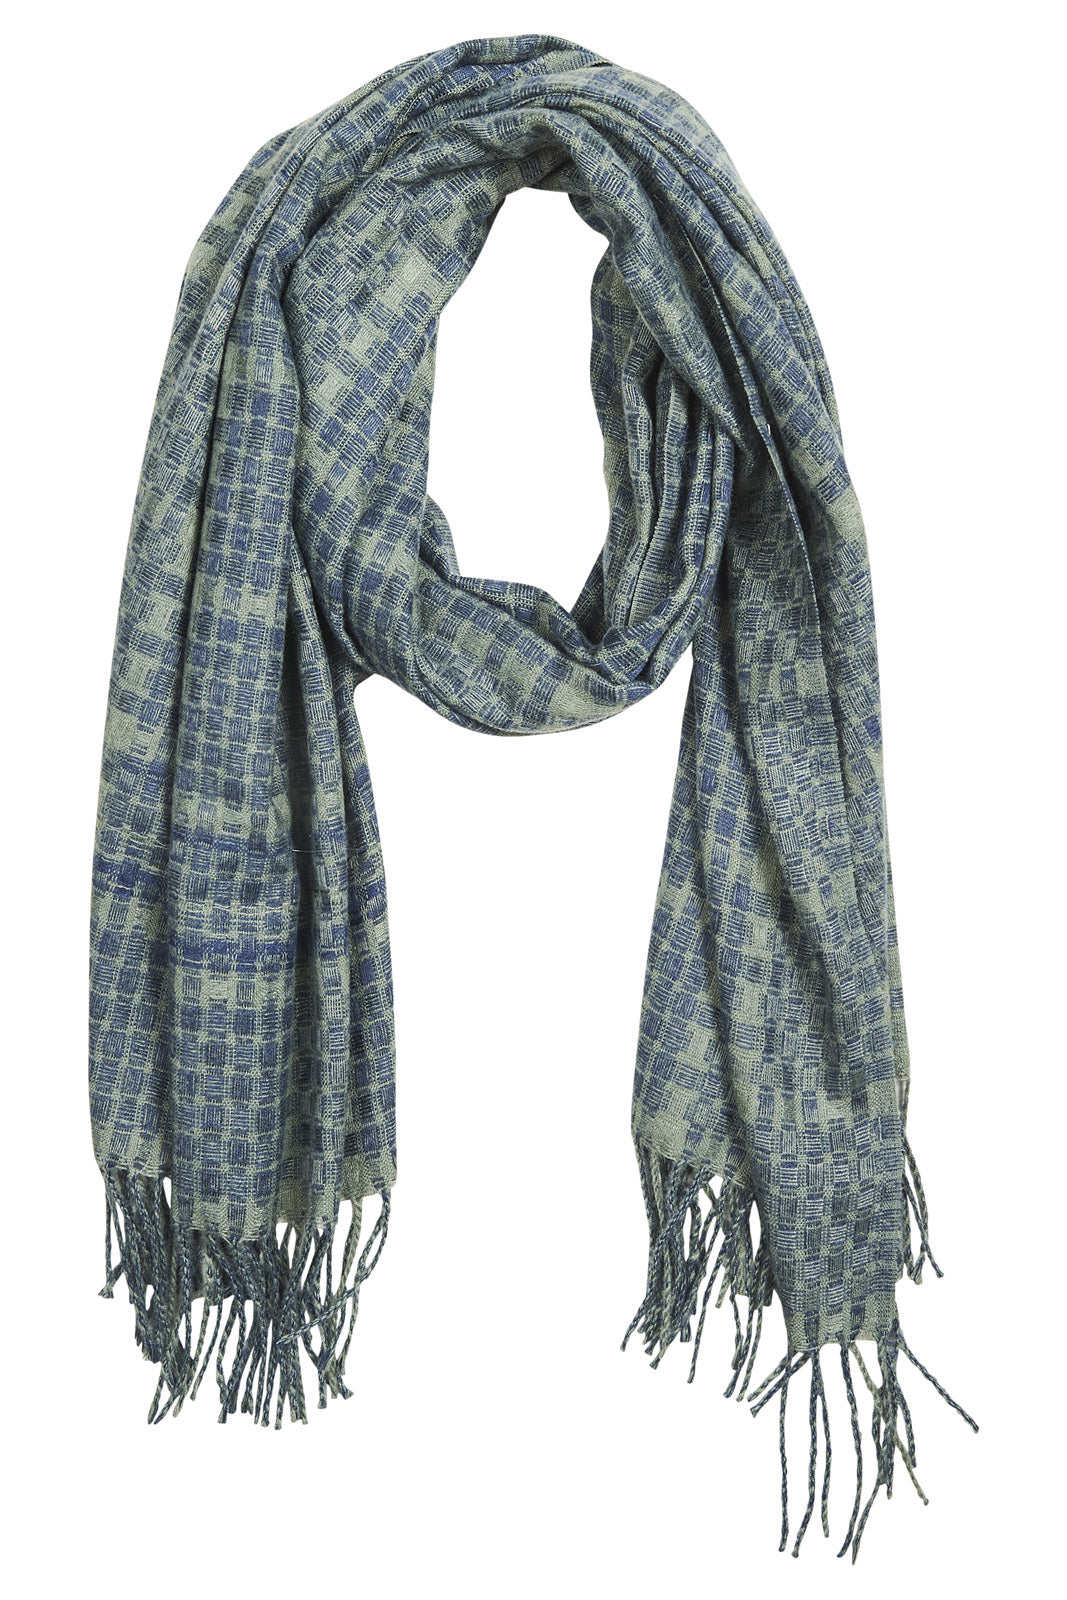 Bruny Scarf - Moss - eb&ive Scarves